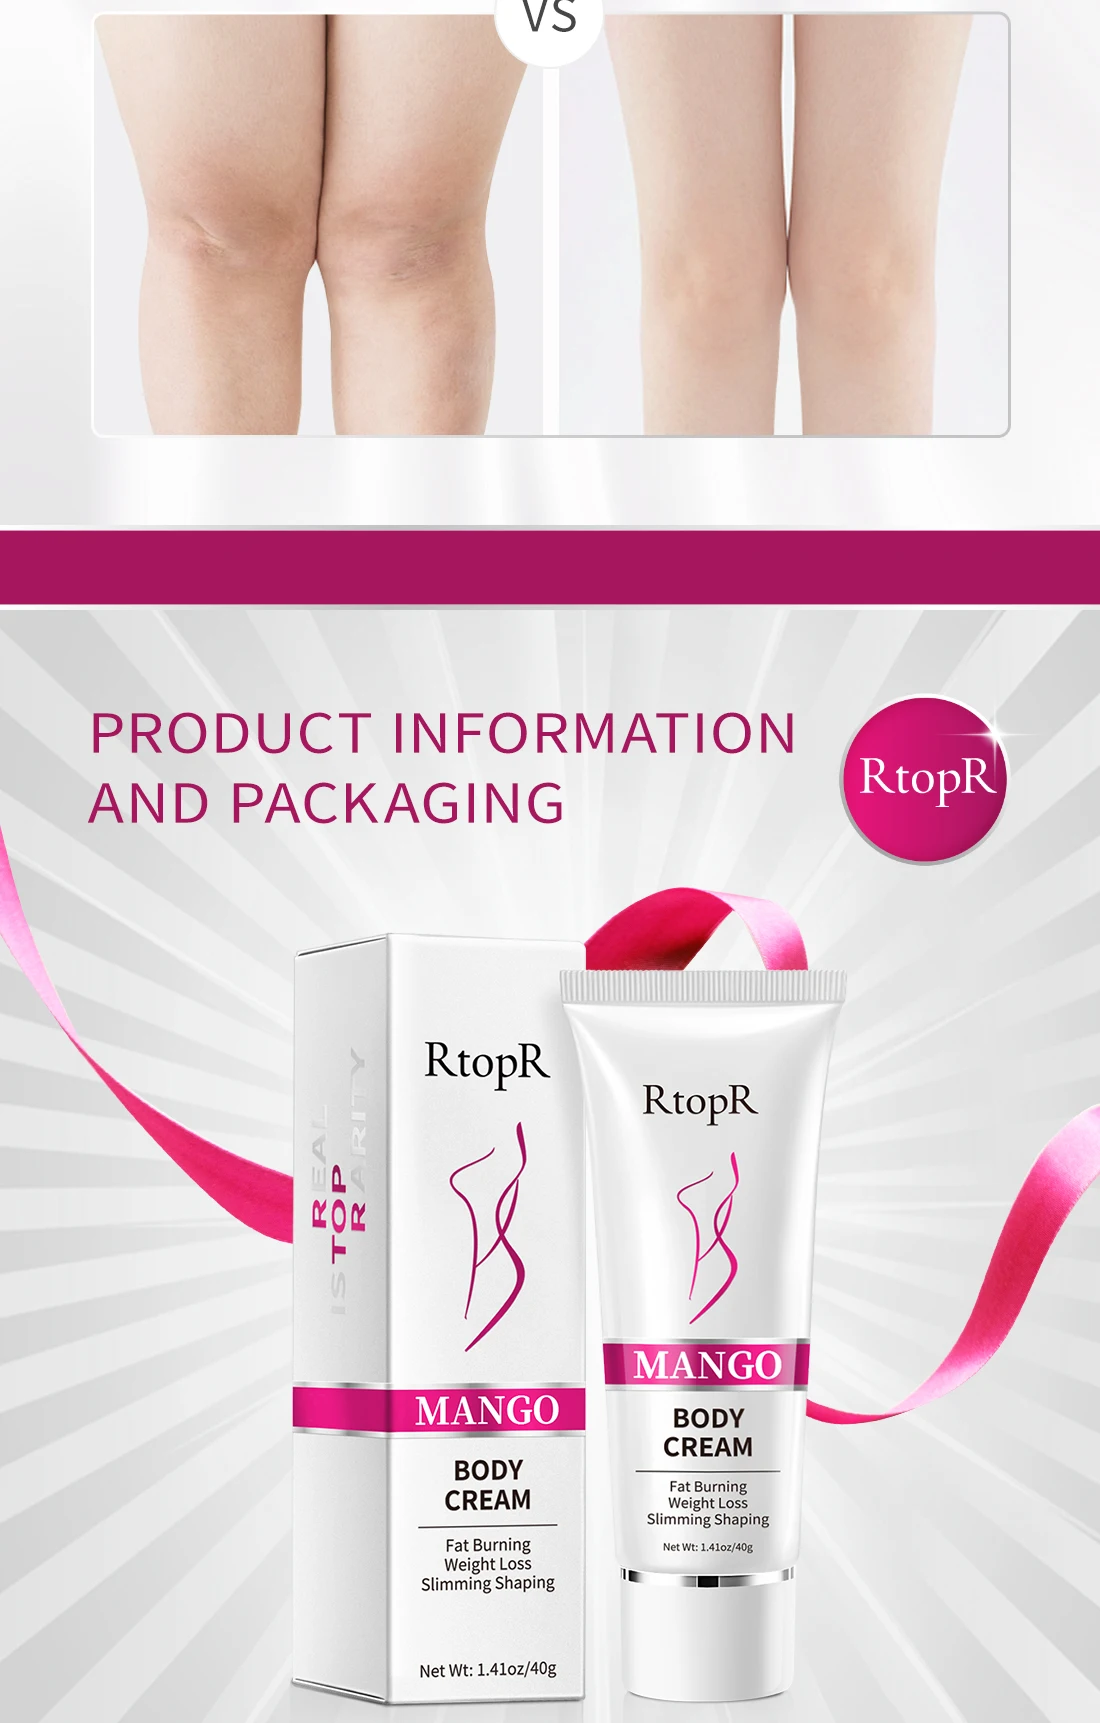 S15290319f69548bfbd7222f2d161392cb RtopR Fat Burning Slimming Cream Promotes Fat Burning Weight Loss Slimming Legs Create Beautiful Curves Sexy Figure Body Care